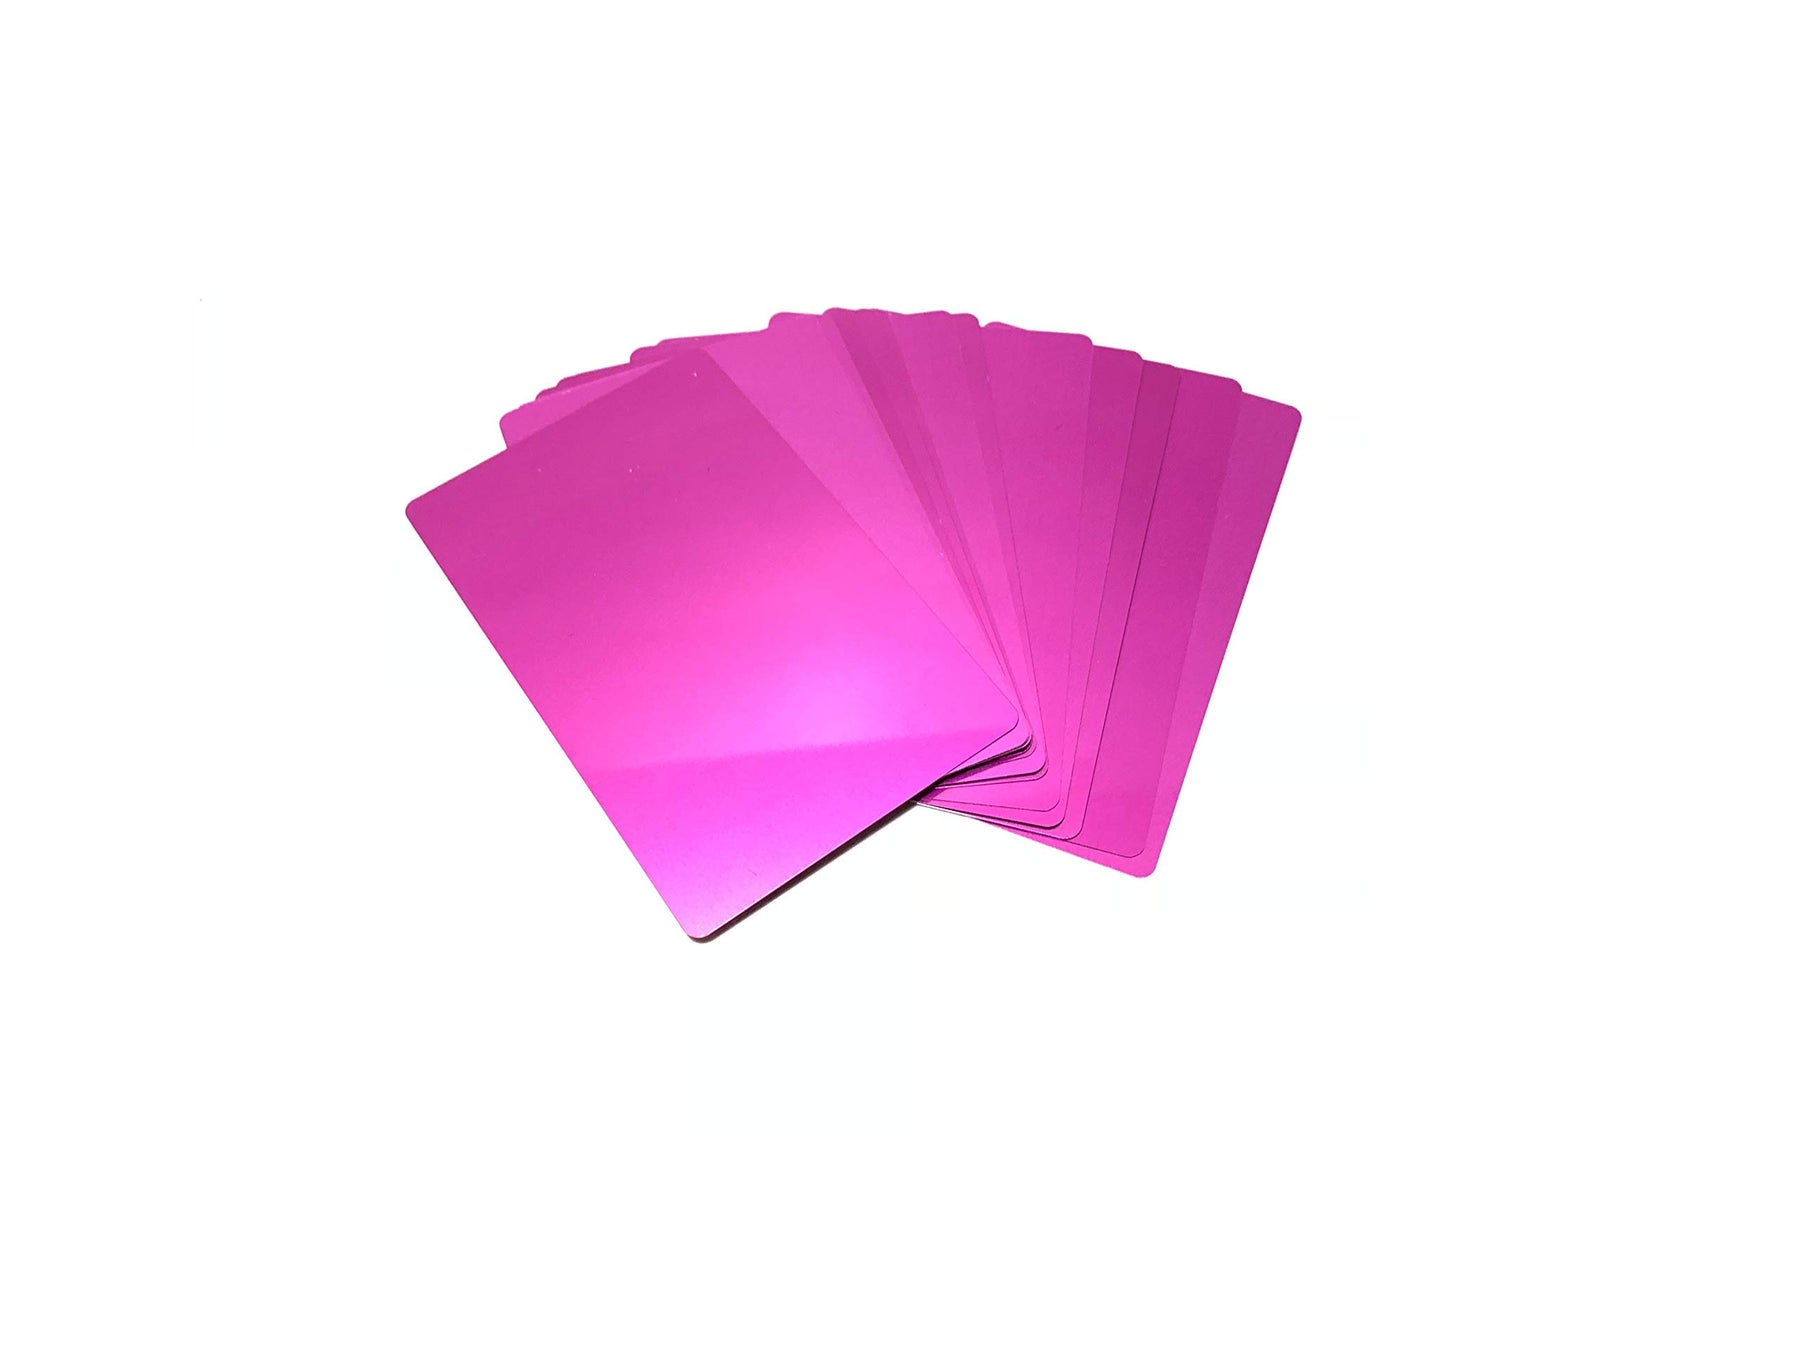 Malayan - 50 PACK Aluminum Business Card Blanks - Laser Engraver and CNC Engraving Color Options Available (Pink)